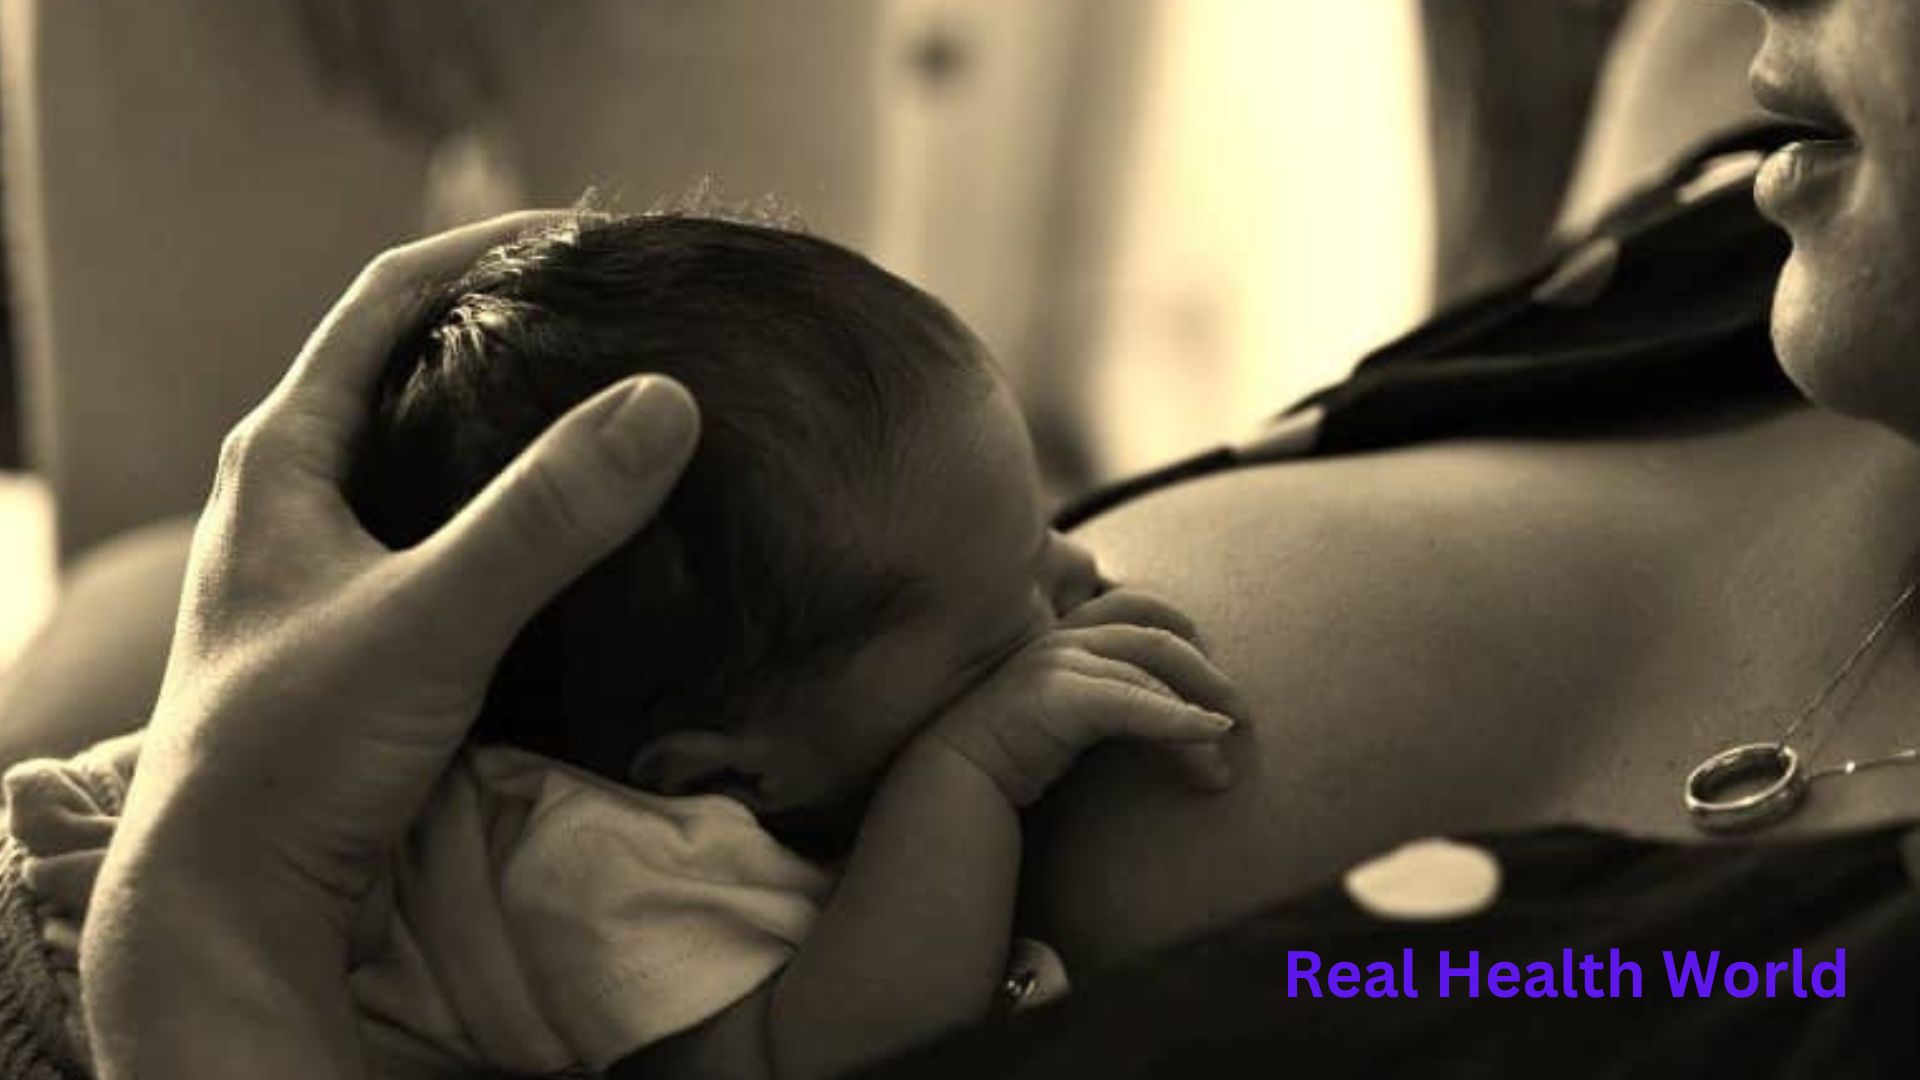 Breastfeeding is associated with improved maternal mental health